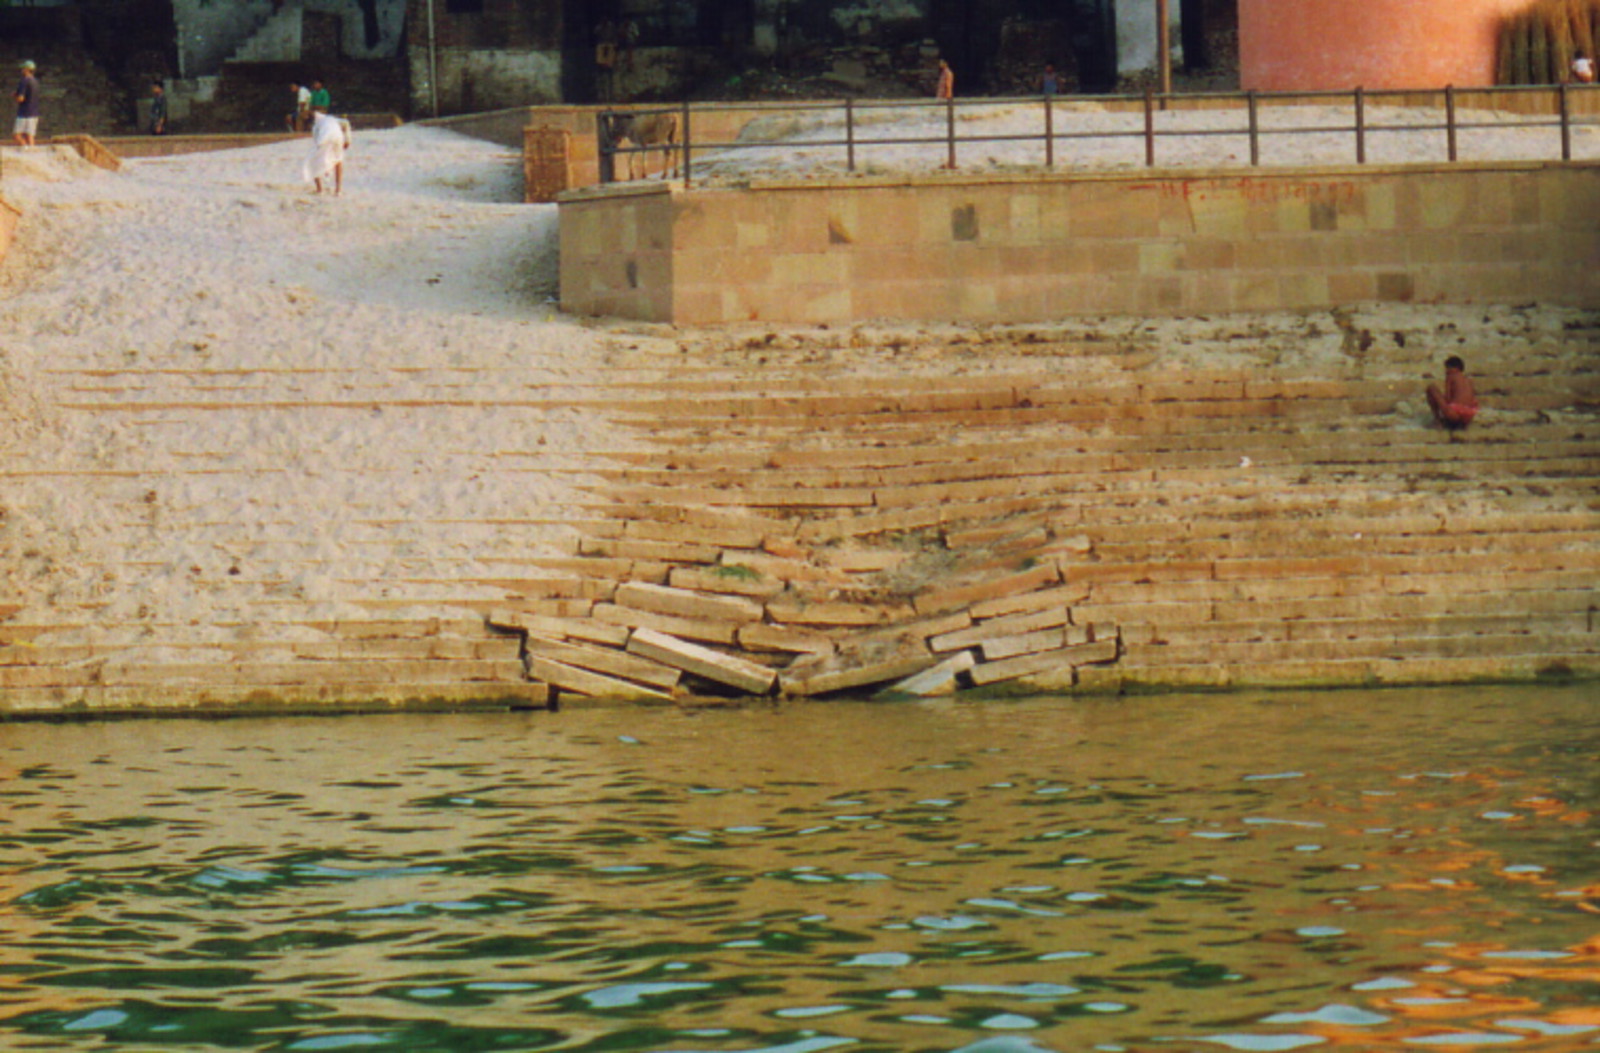 A collapsing ghat by the Ganges